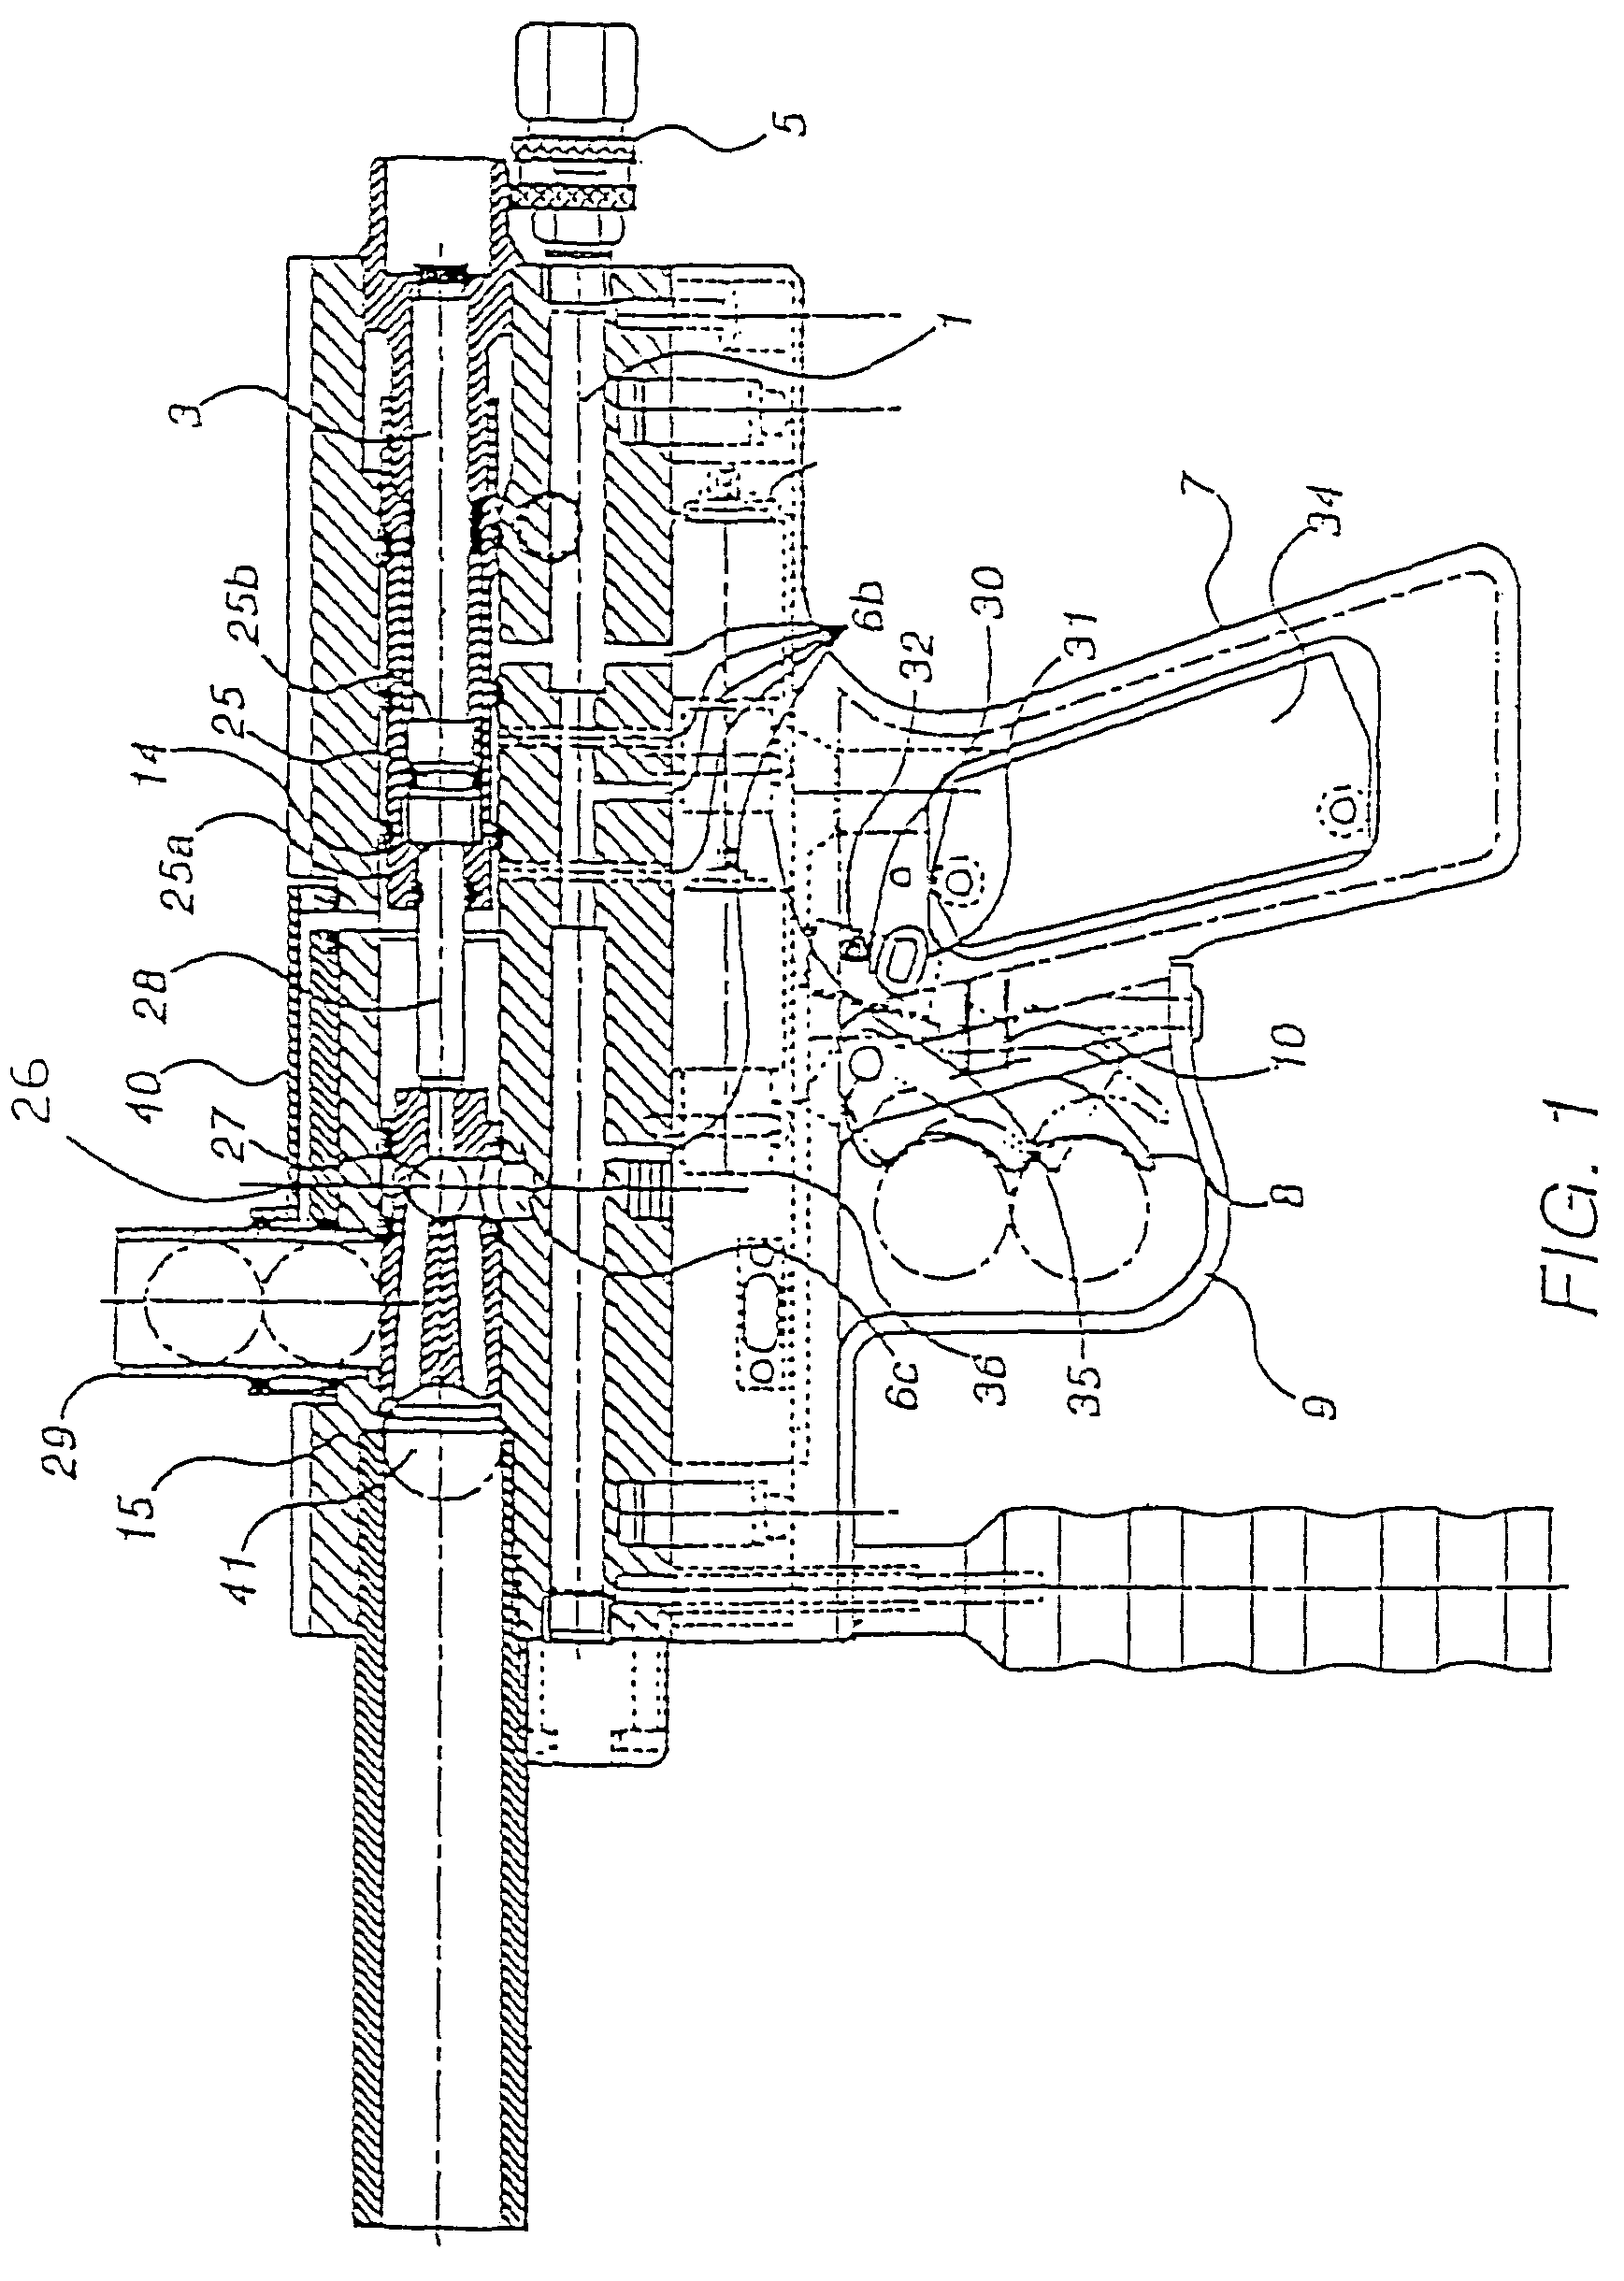 Pneumatically operated projectile launching device